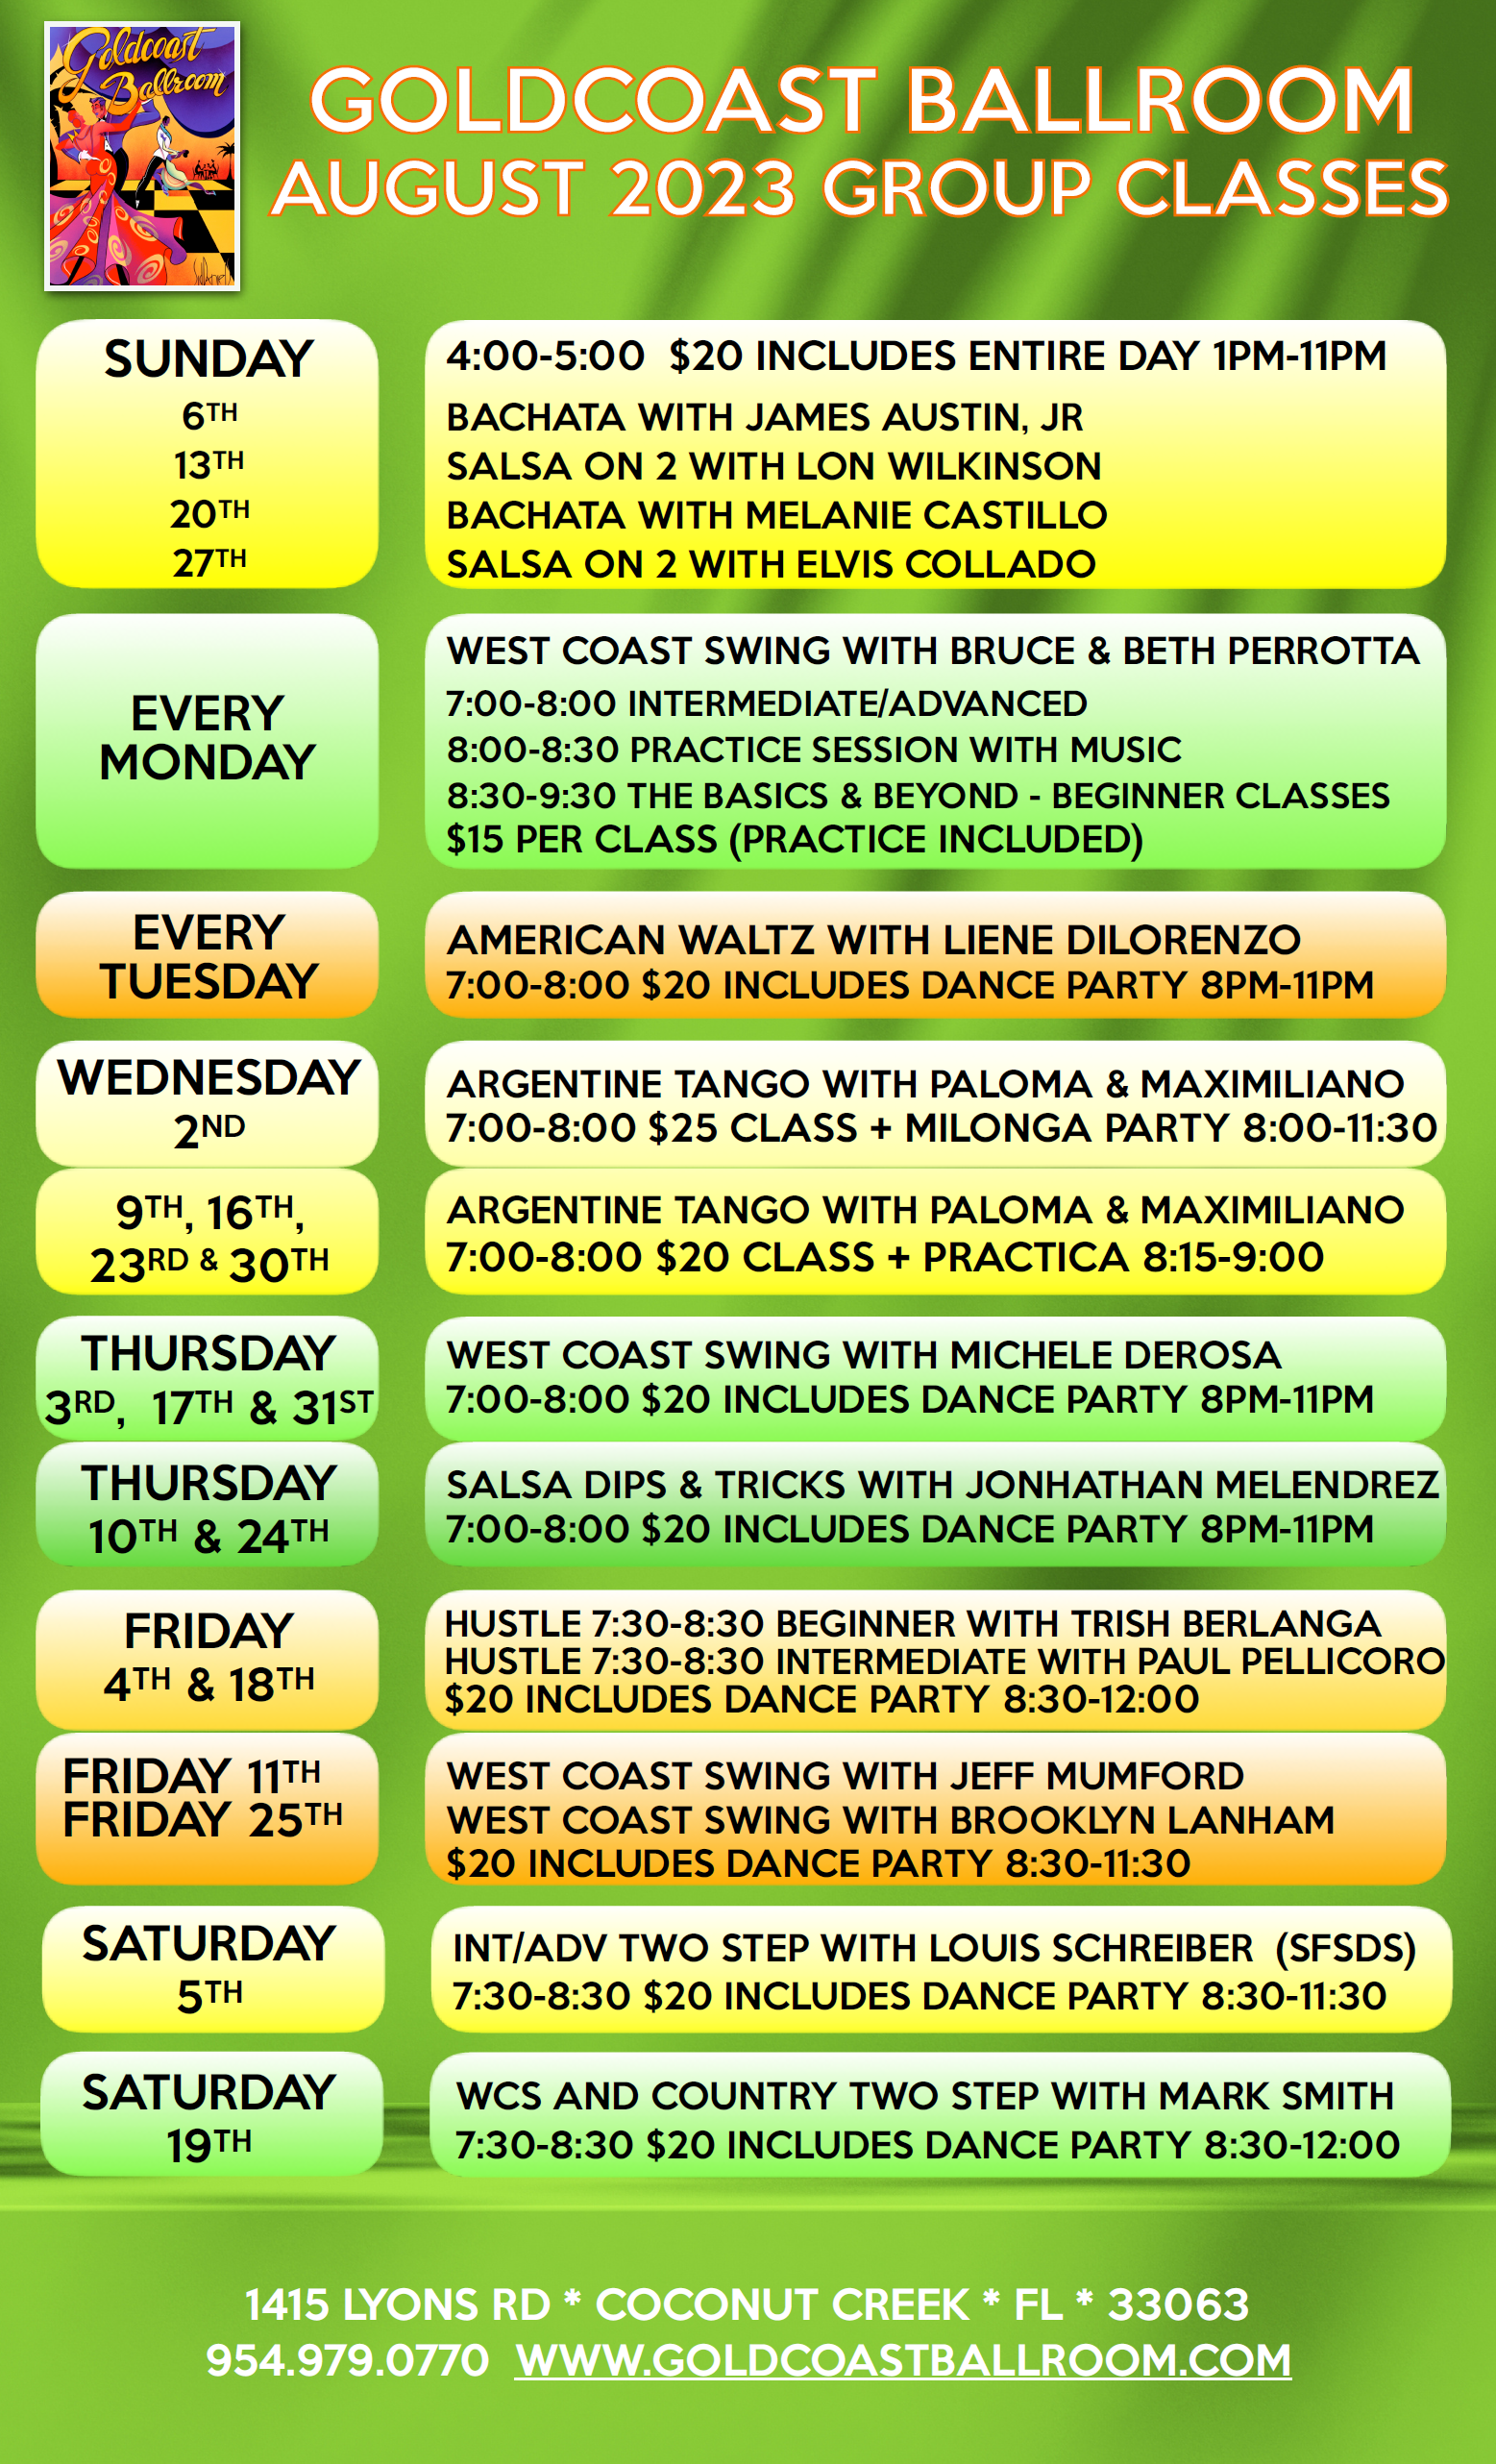 August 2023 Group Classes at Goldcoast Ballroom